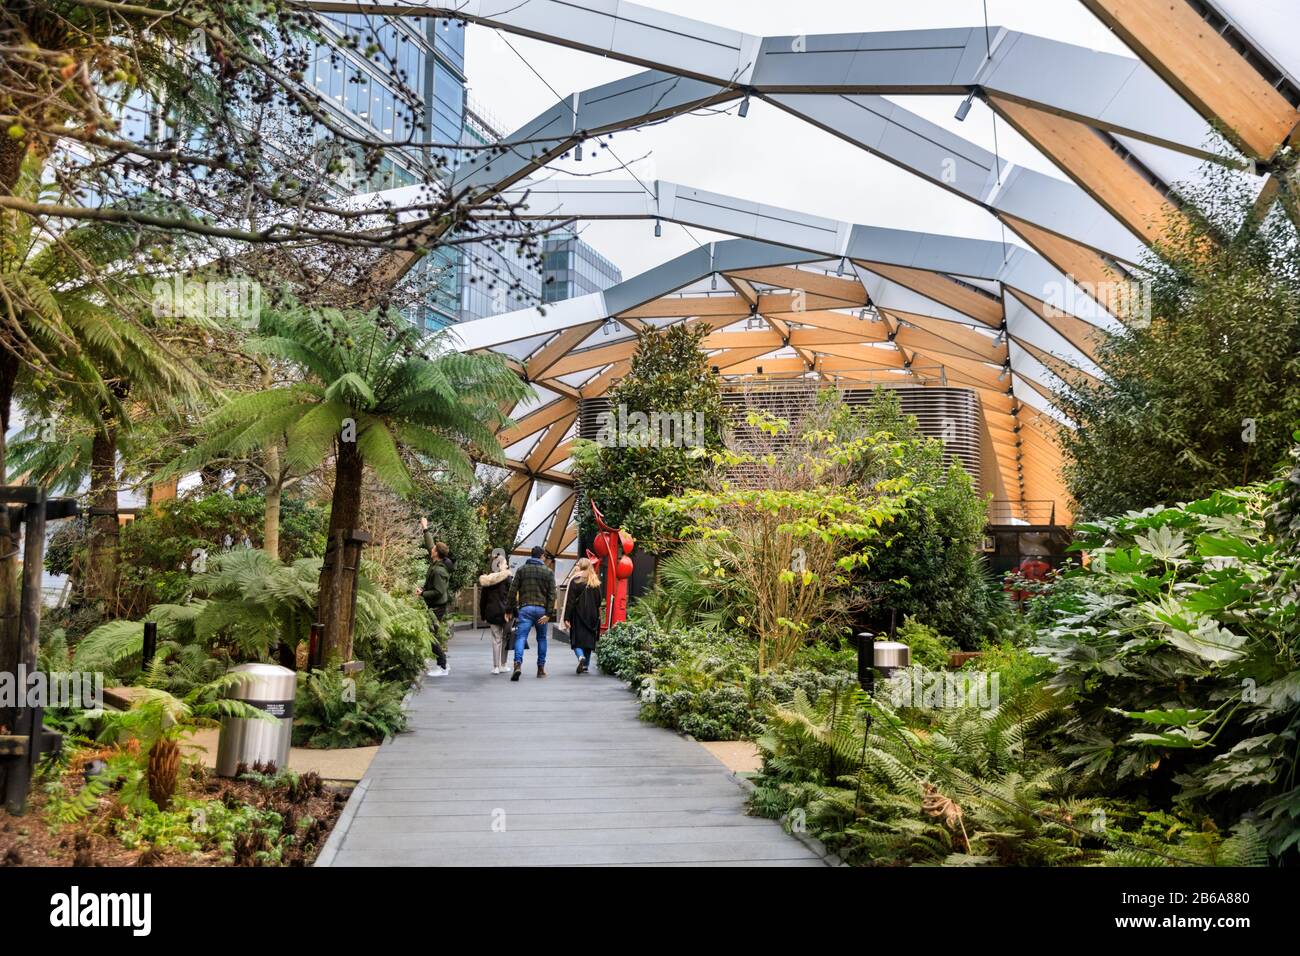 Crossrail Place Roof Garden, people walking in urban retreat and green architecture, Canary Wharf, London Stock Photo